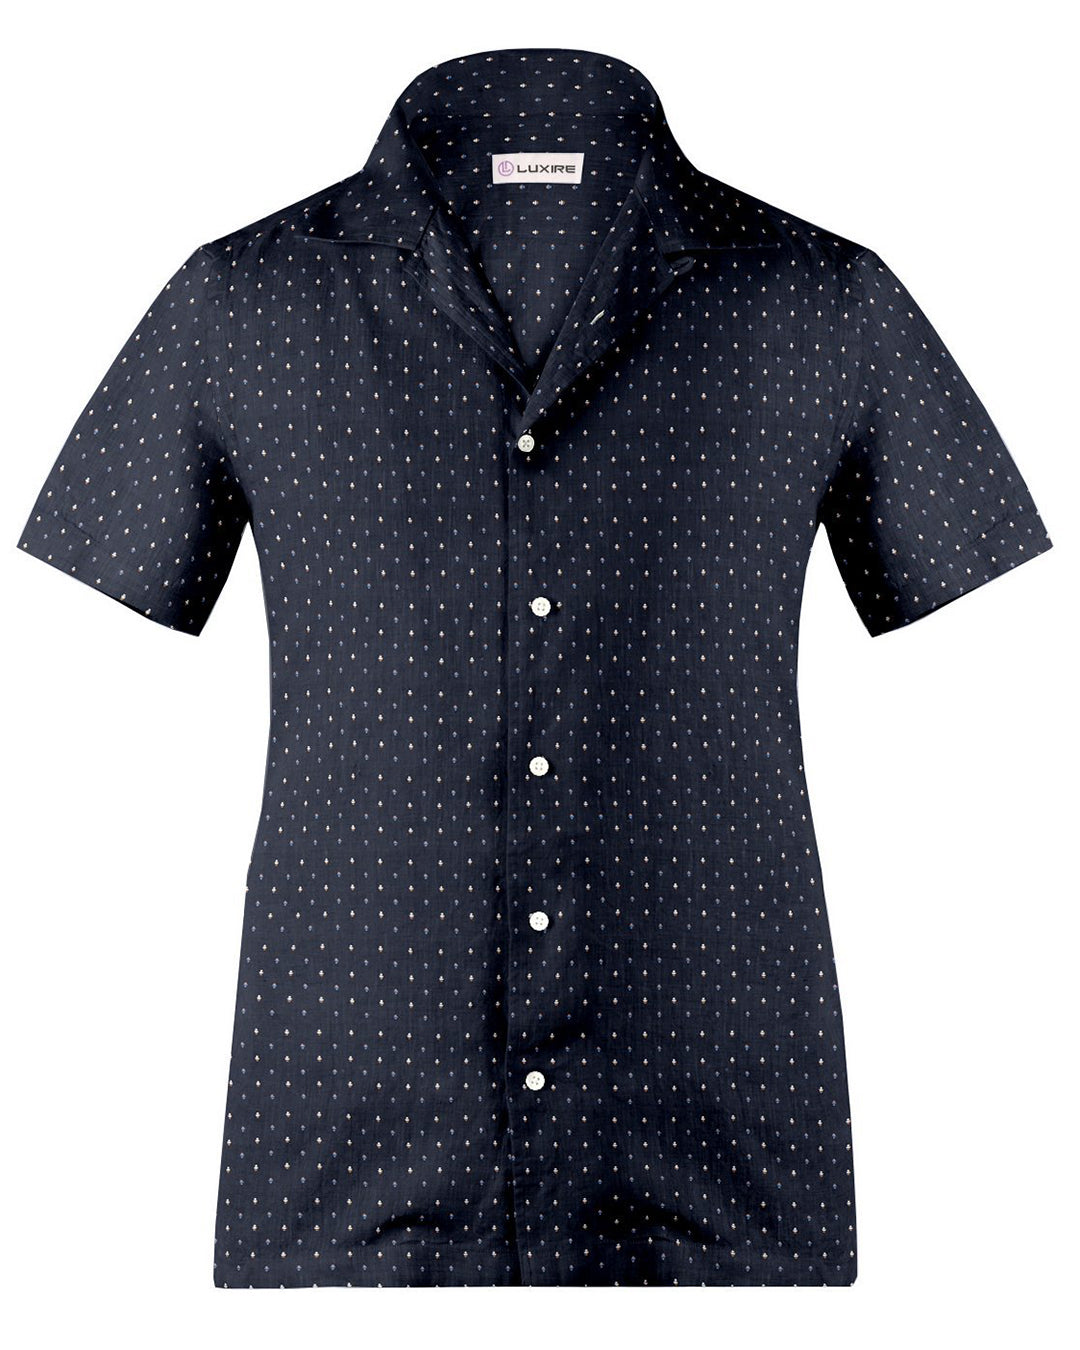 Camp collar PRESET STYLE in Print: Navy Blue Anchor